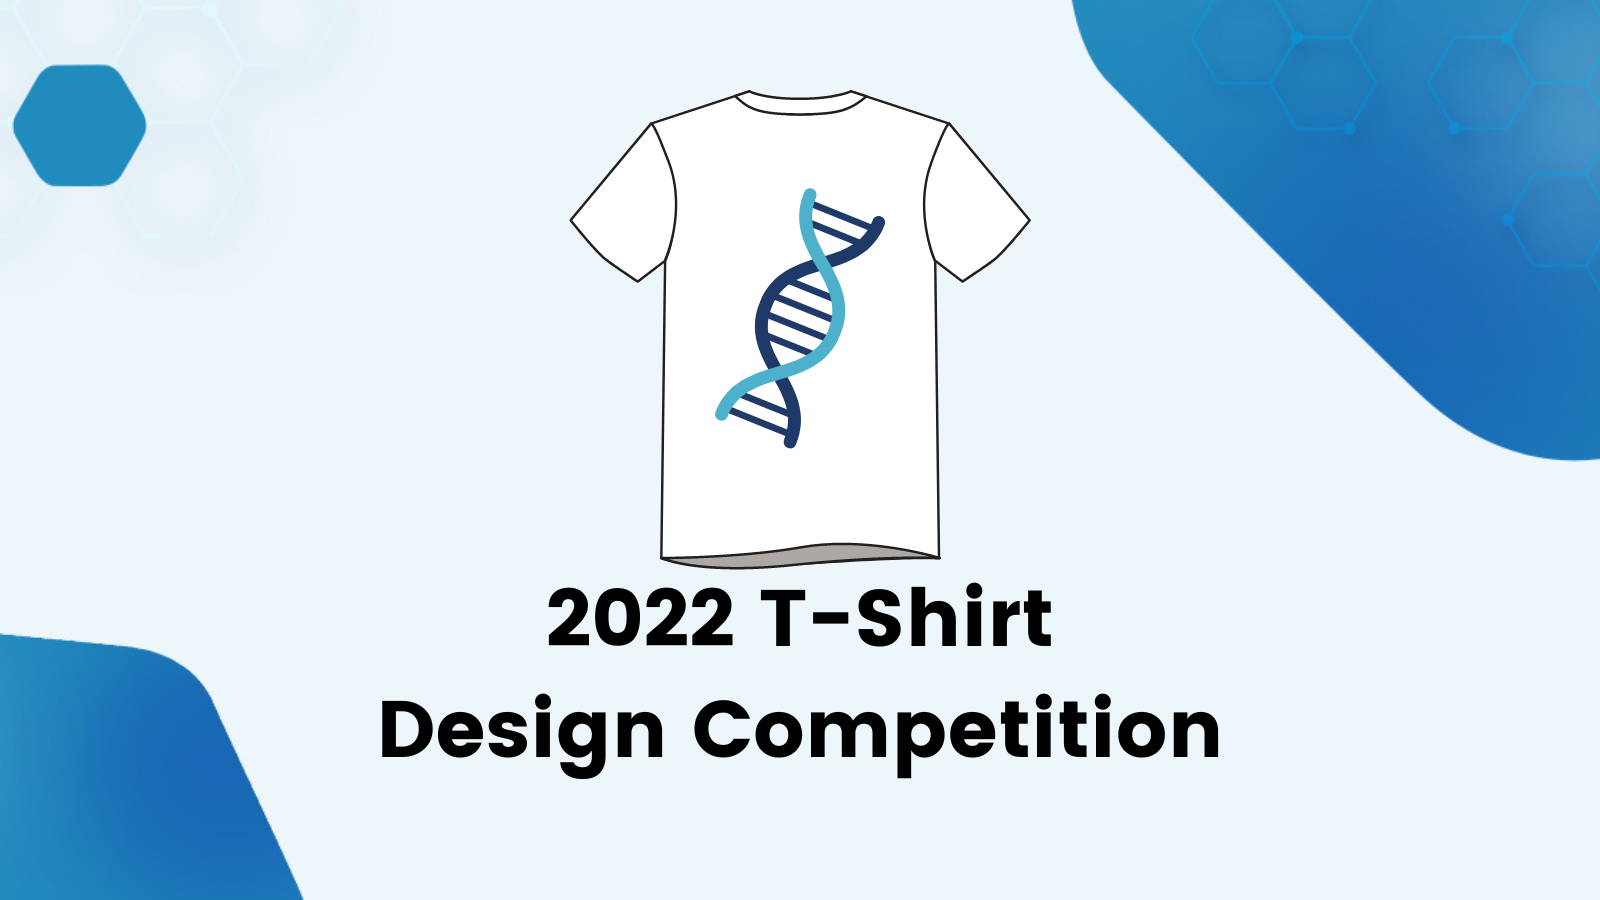 It’s everyone’s favorite time of the year; Golden Helix’s Annual T-Shirt Design Competition is starting!